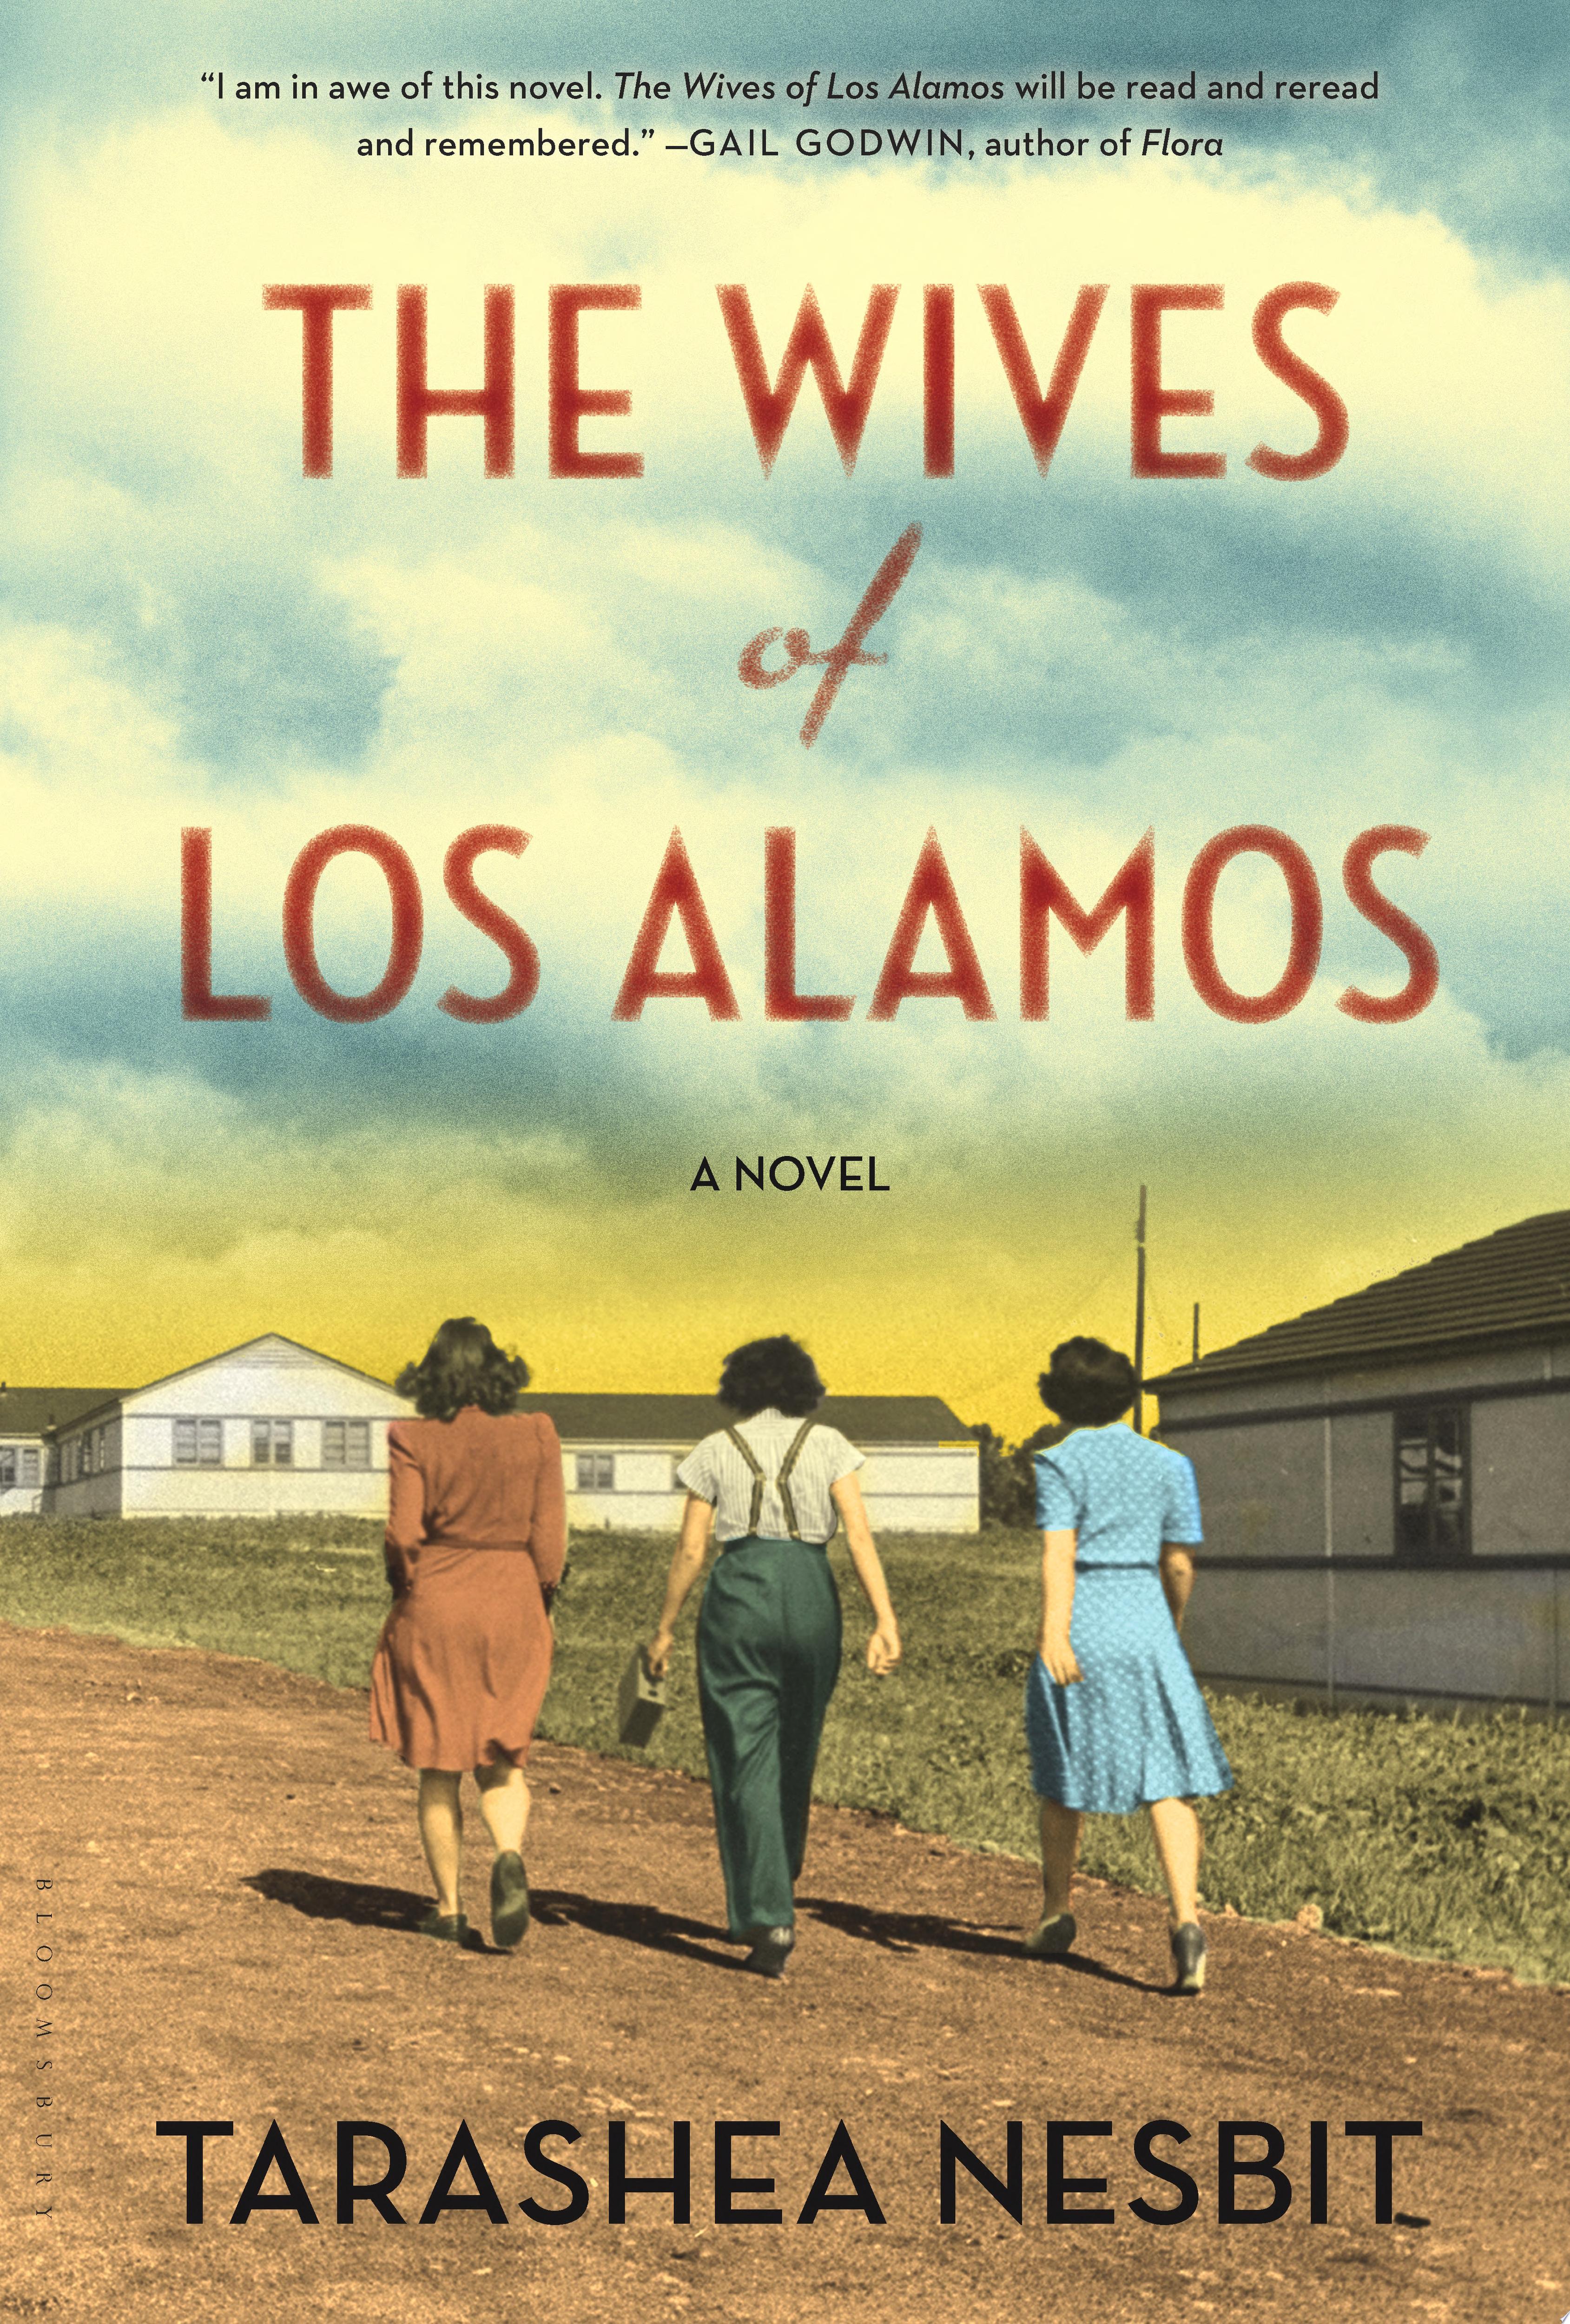 Image for "The Wives of Los Alamos"